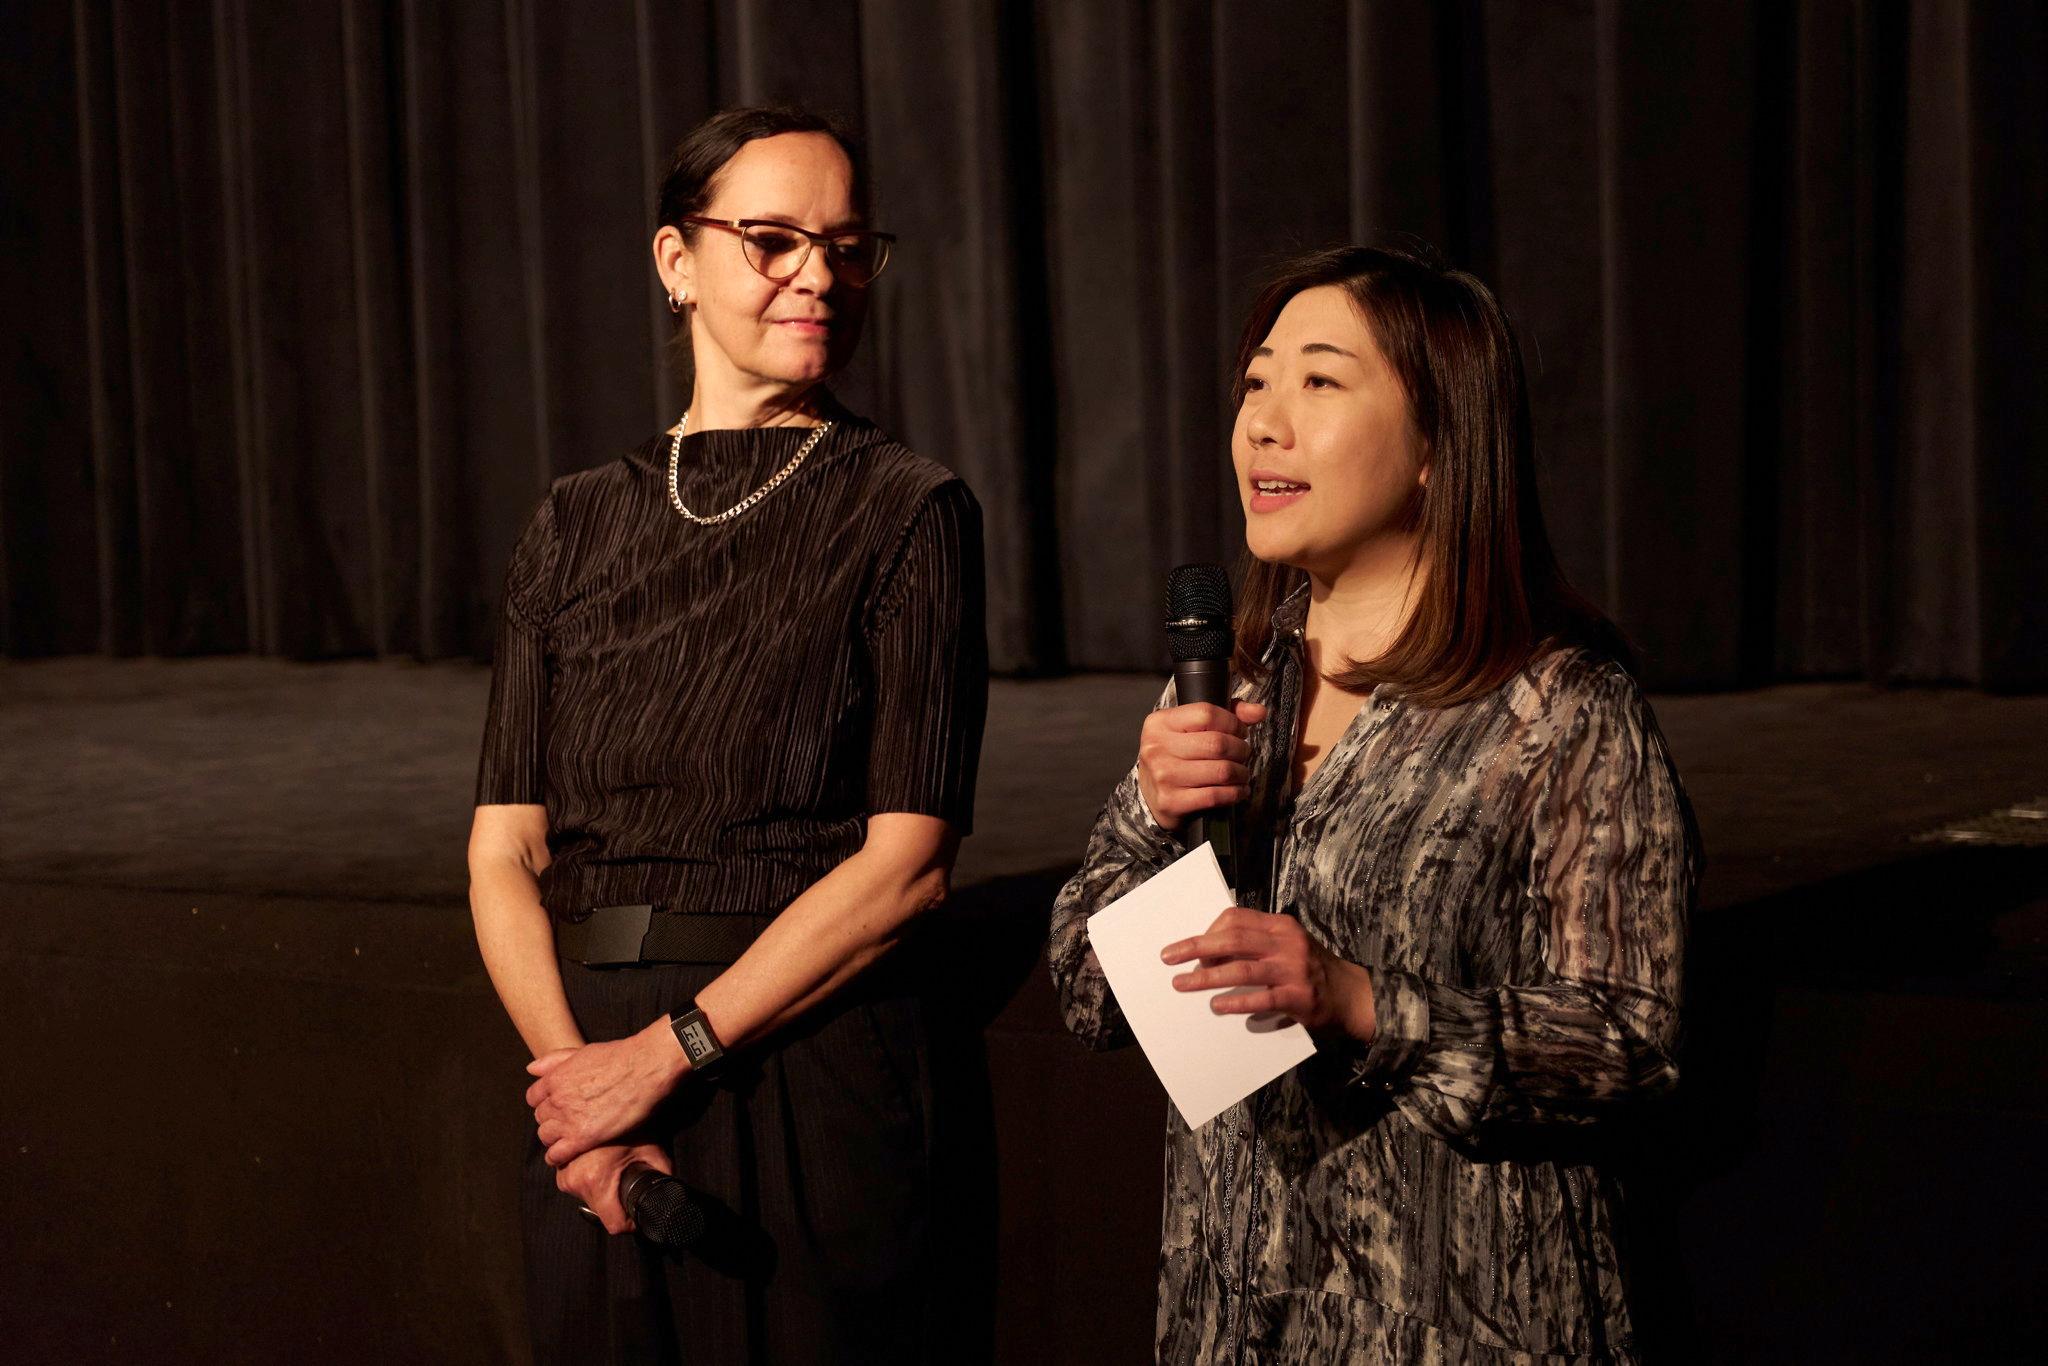 The Director of HKETO Berlin, Ms Jenny Szeto (right), speaking at the opening screening in Vienna on April 22 (Vienna time).